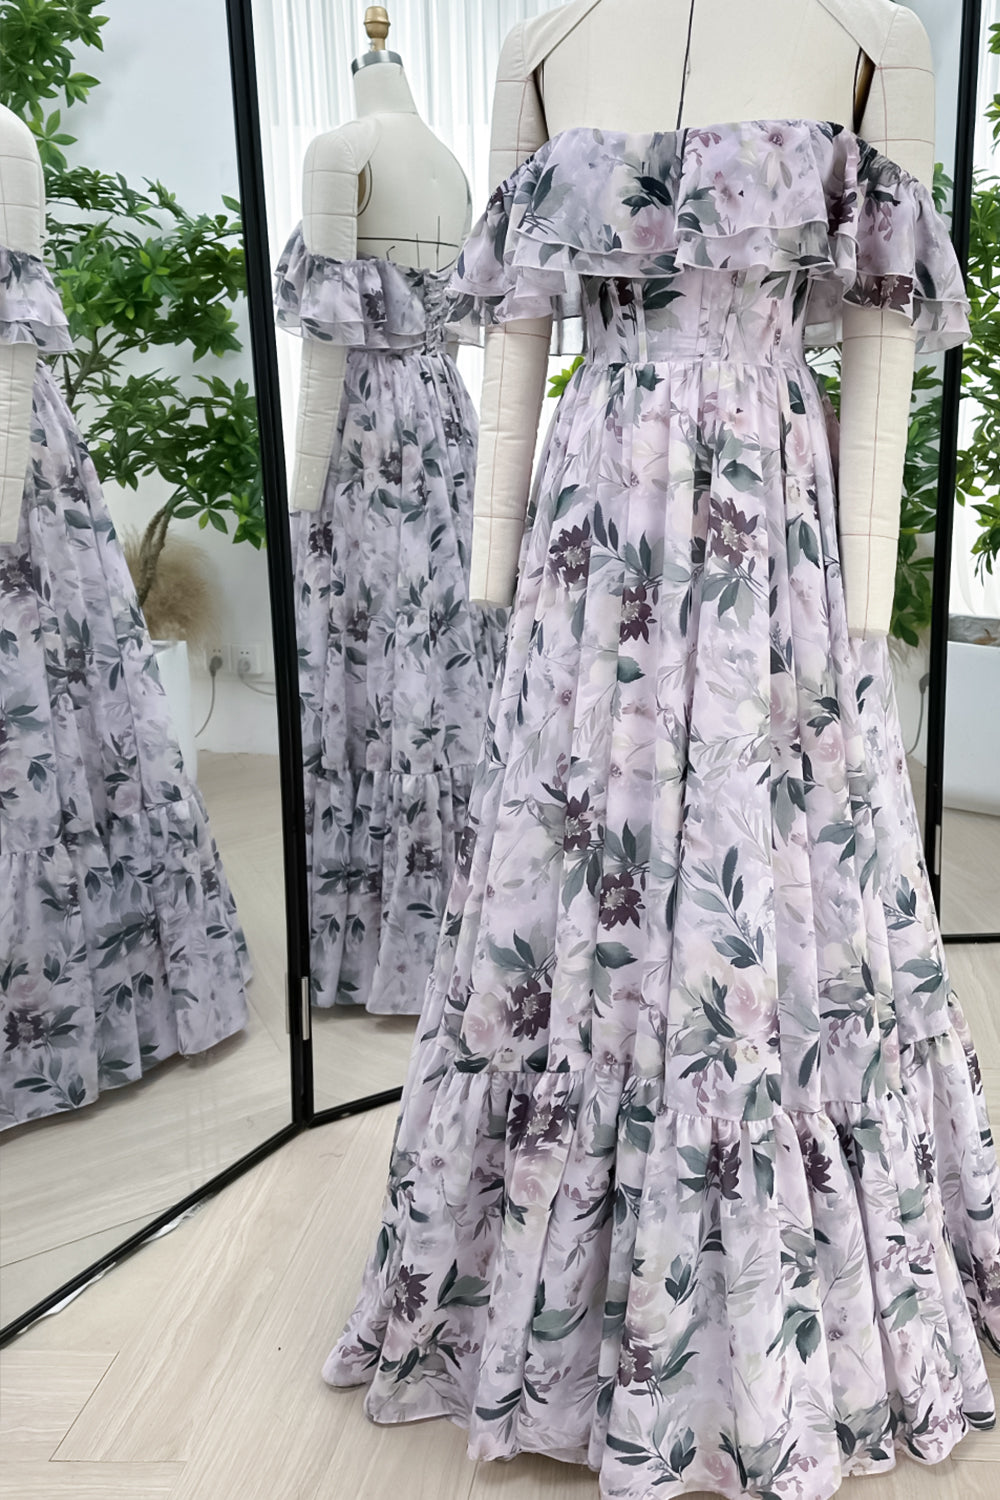 Off the Shoulder Corset Floral Print Chiffon Tiered Dress